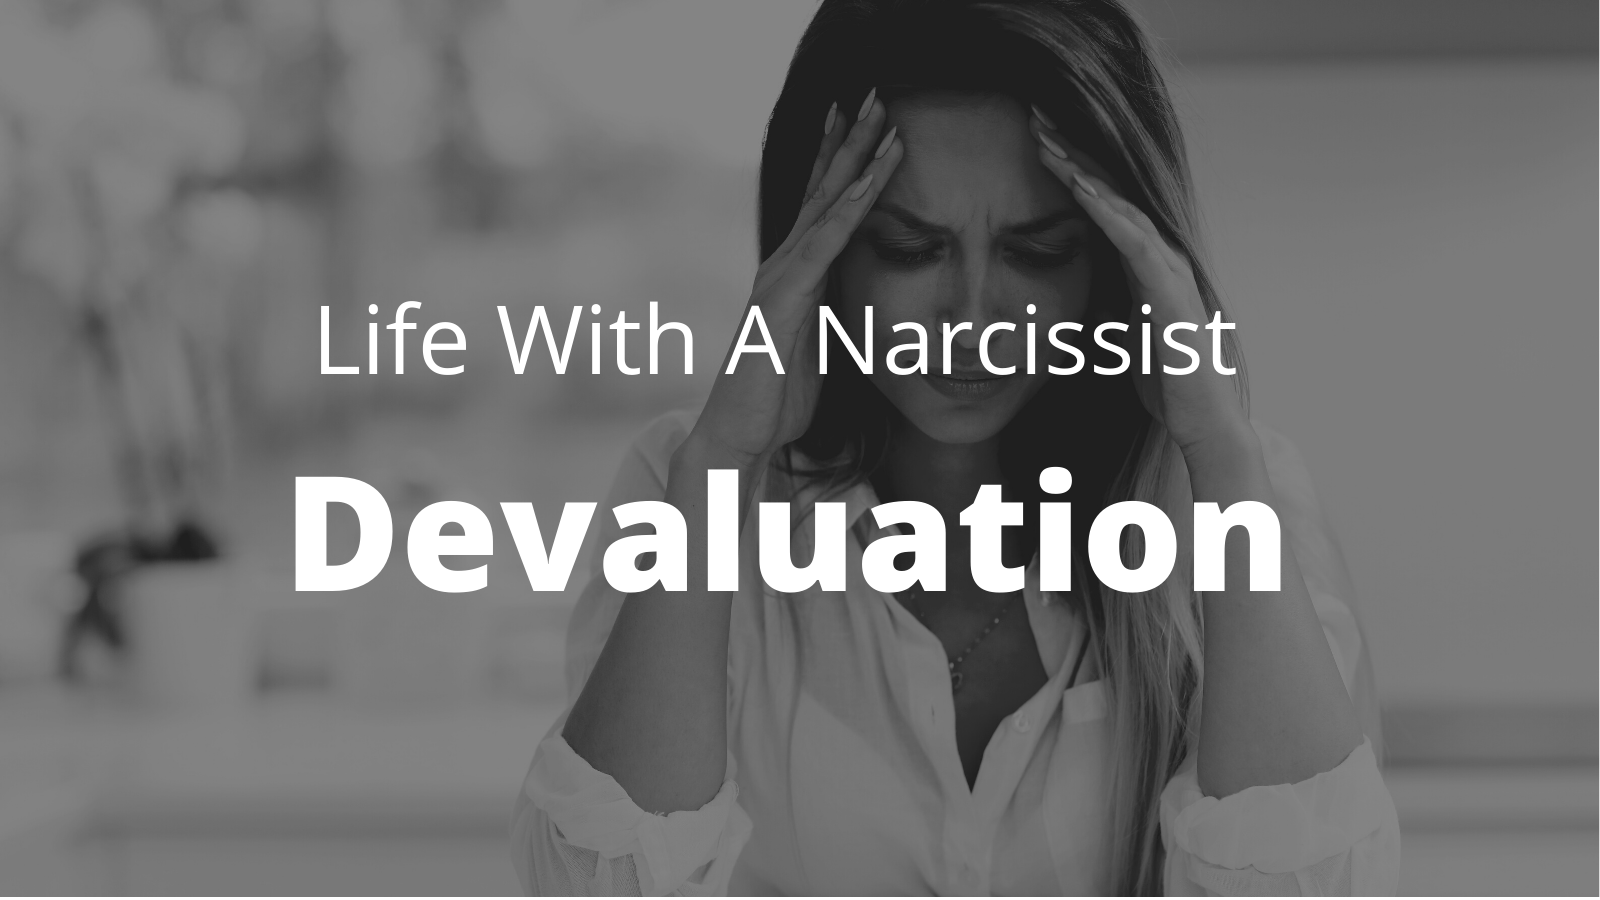 devaluation by narcissist